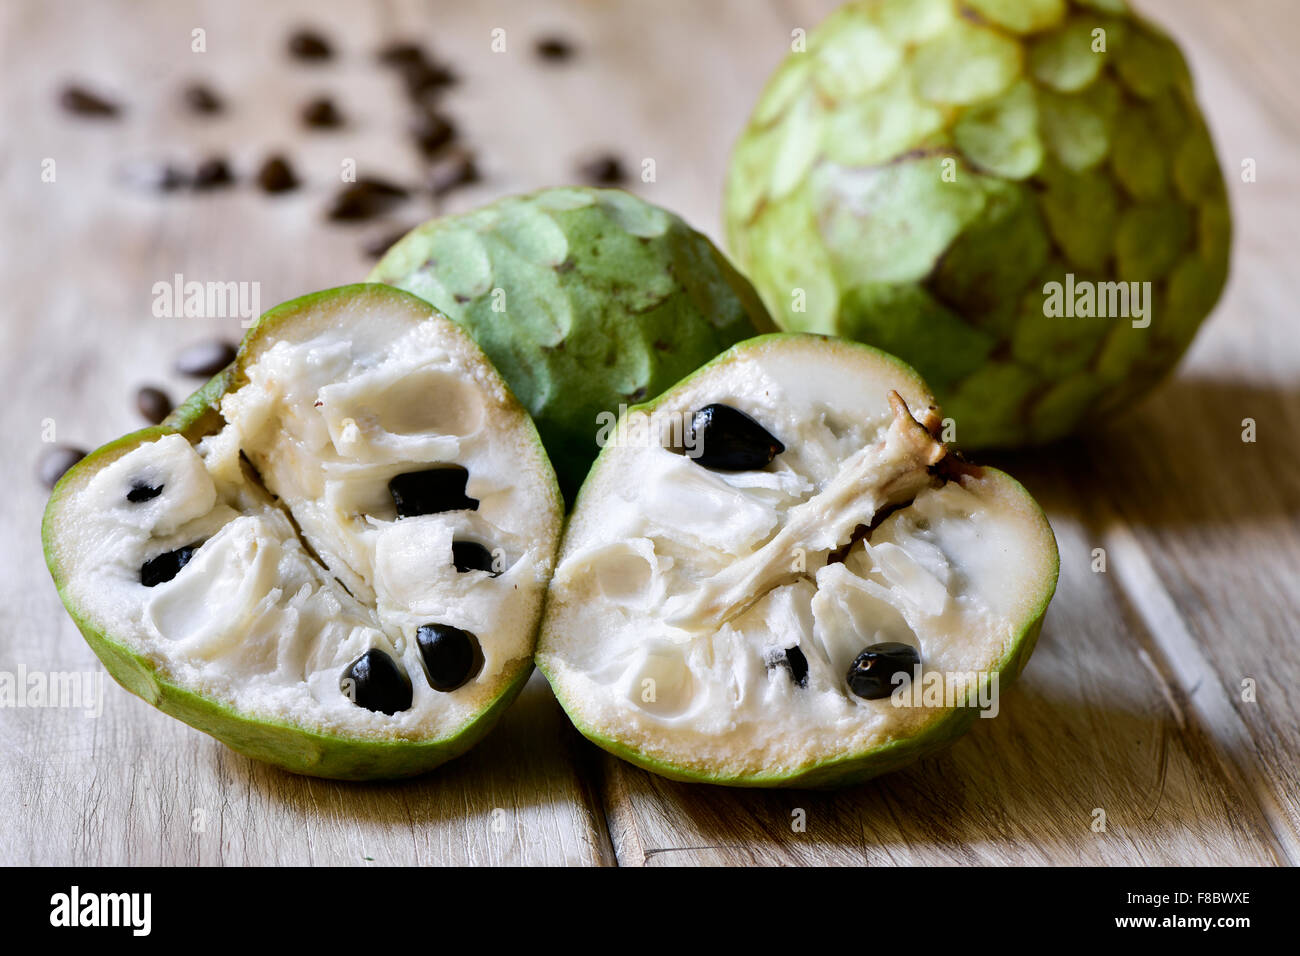 closeup of some custard apples, one of them cut in half, on a rustic wooden surface Stock Photo